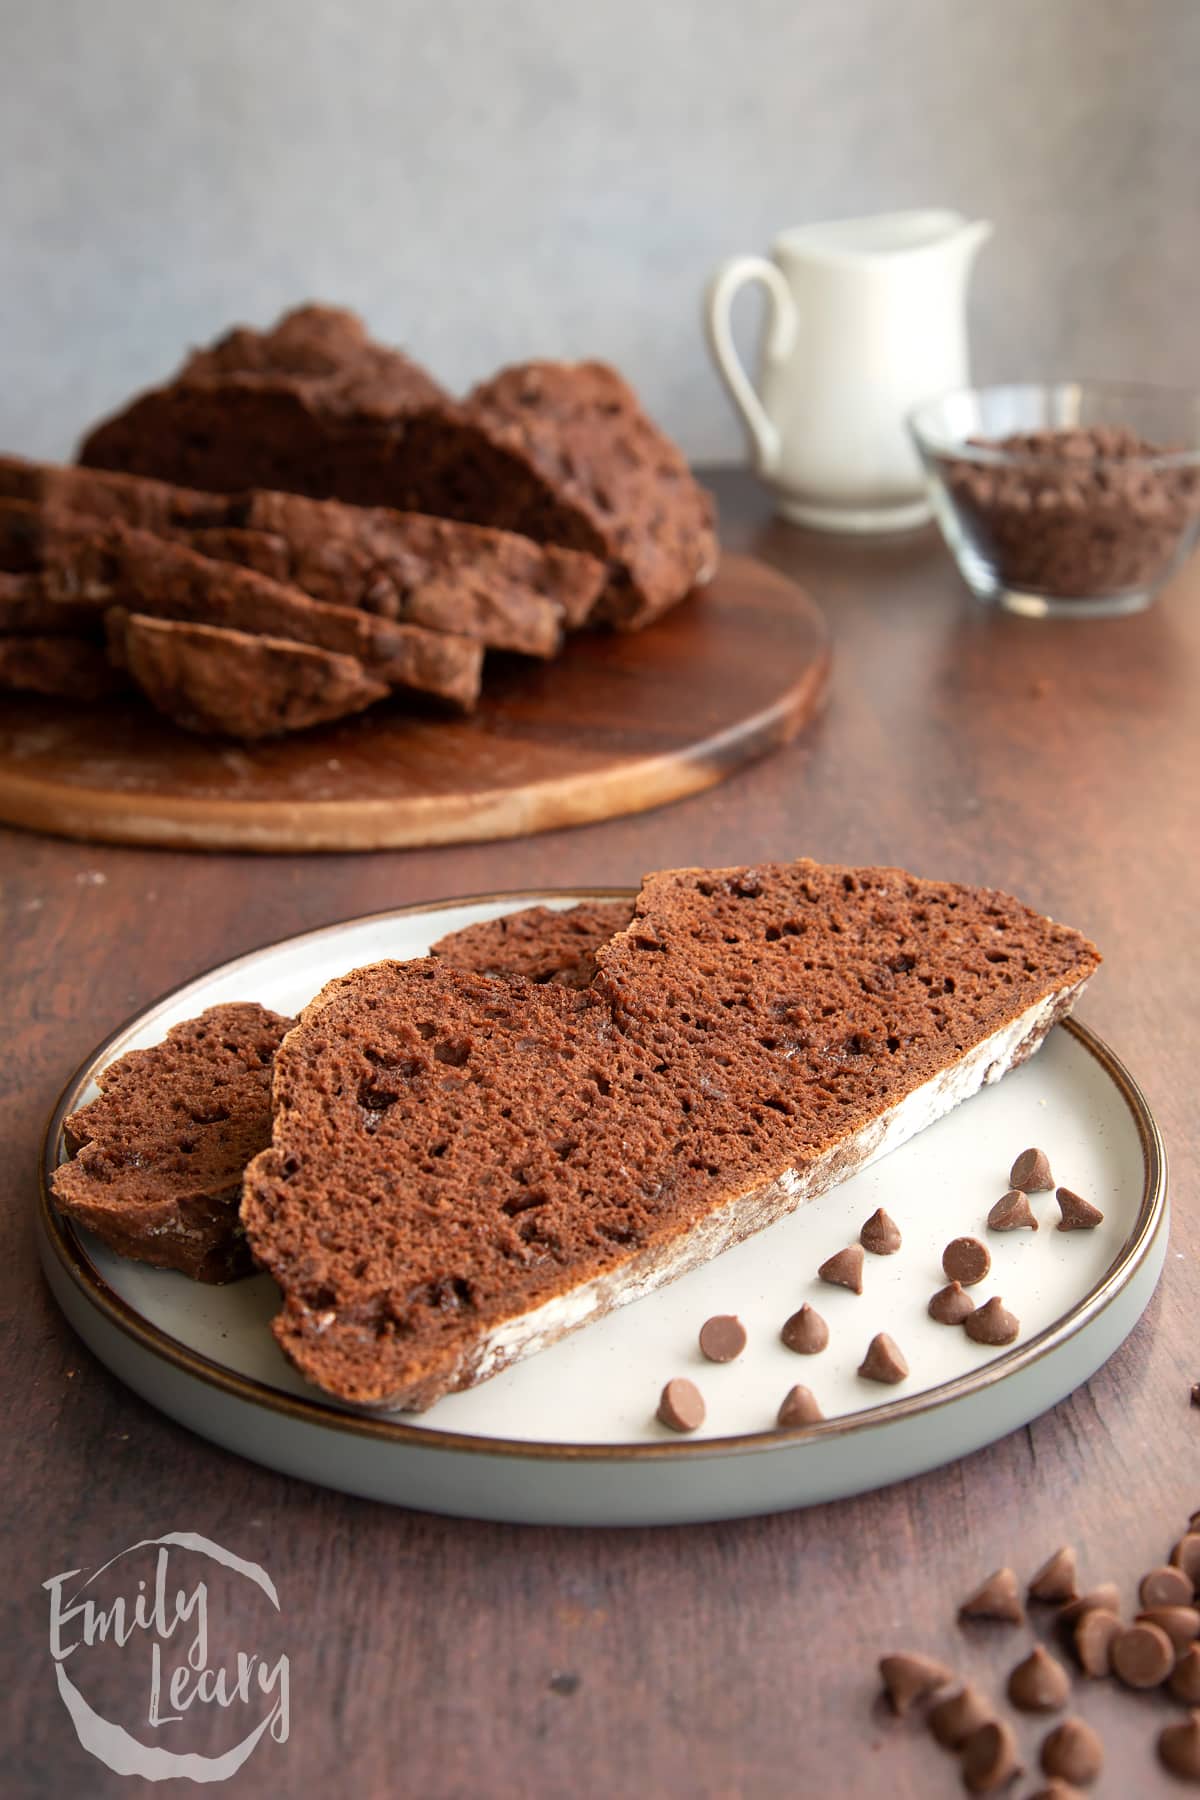 A finished slice of chocolate soda bread served on a decorative plate with the remaining chocolate soda bread in the background on a wooden board.